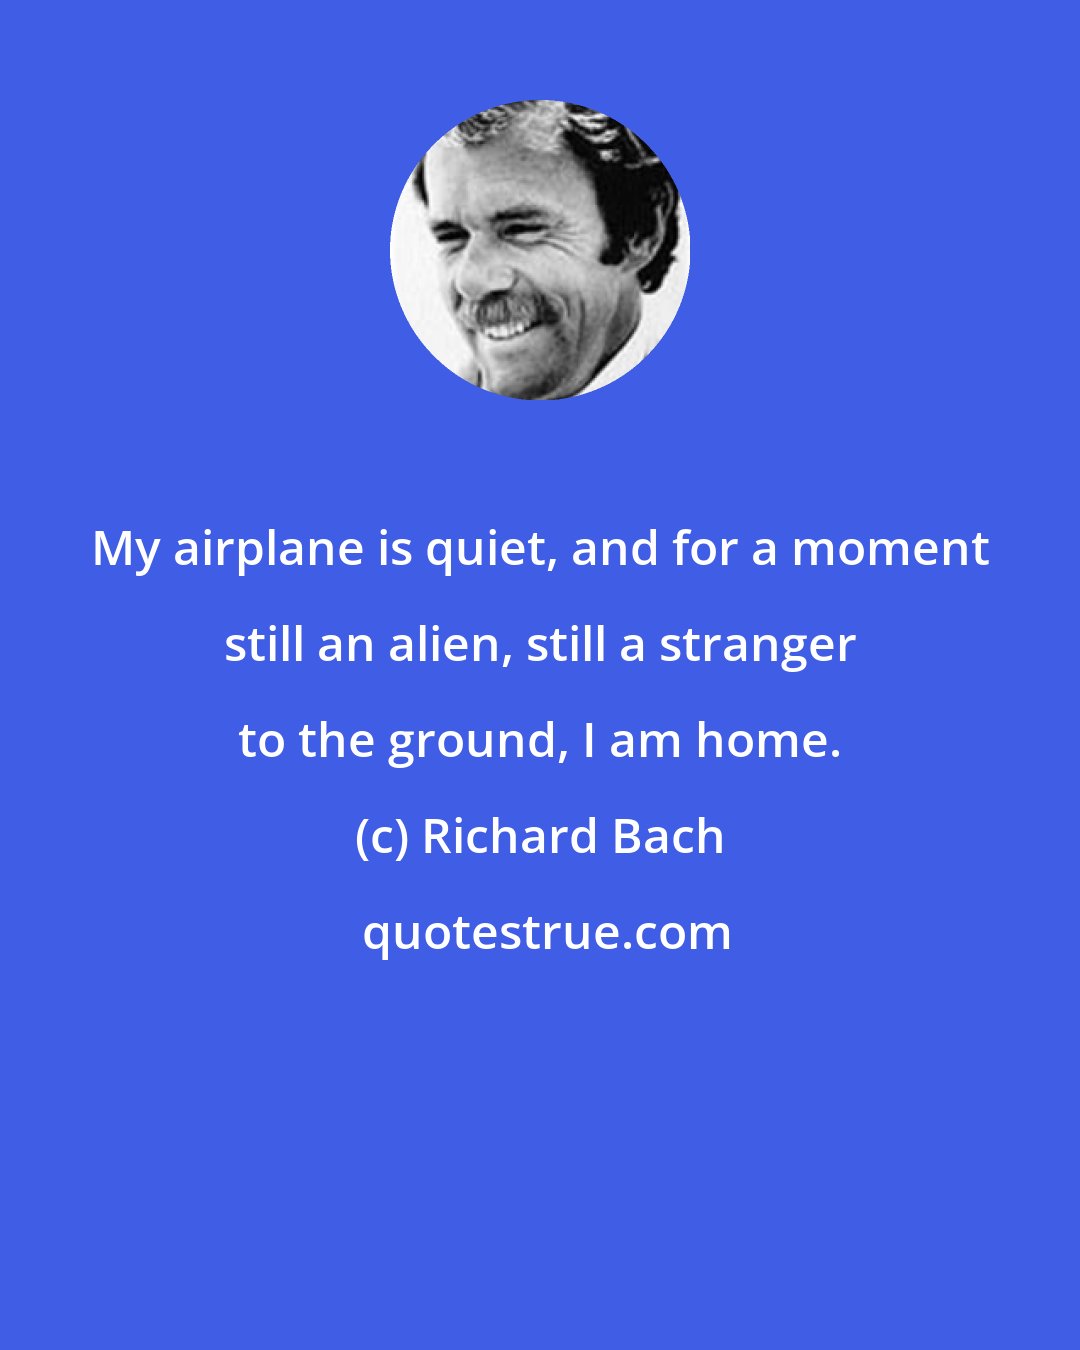 Richard Bach: My airplane is quiet, and for a moment still an alien, still a stranger to the ground, I am home.